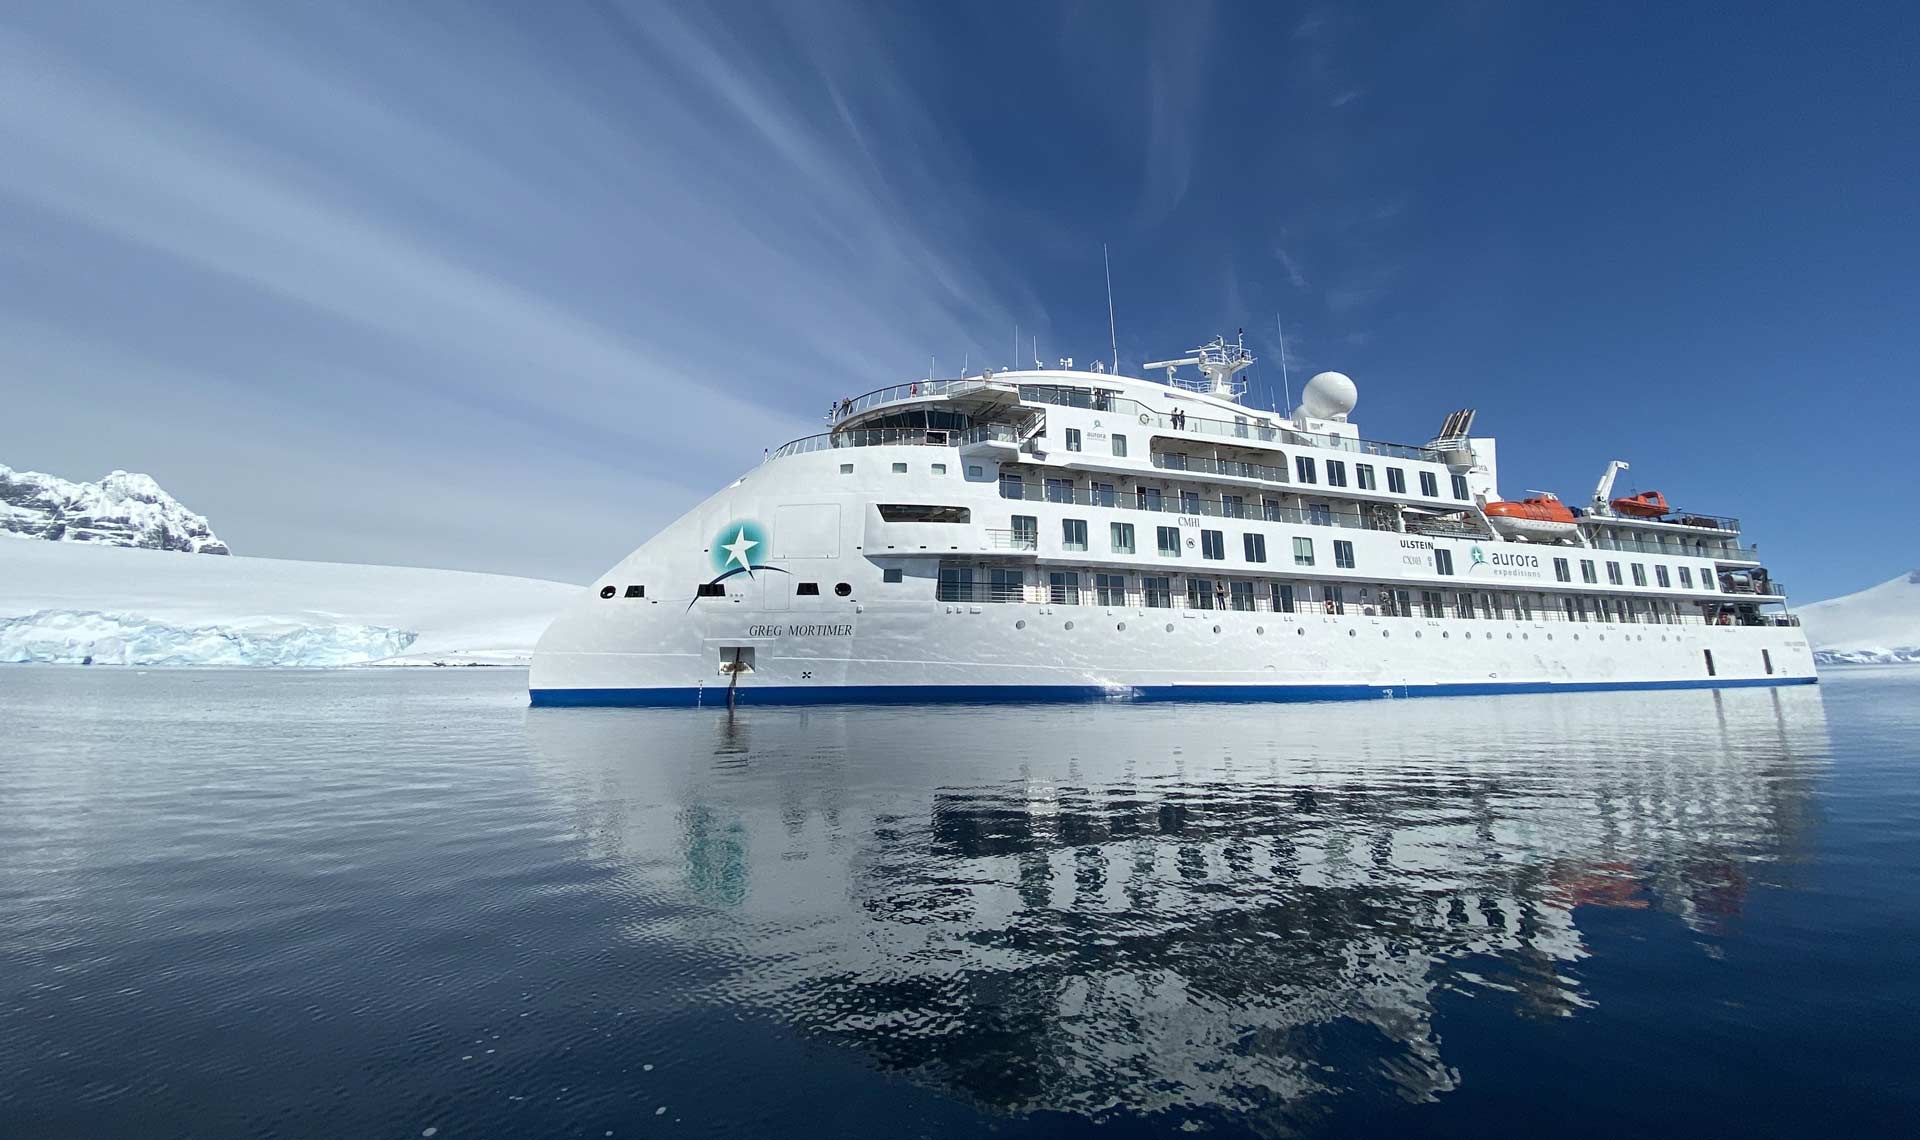 Expedition Cruise Ship The Greg Mortimer In Antarctica